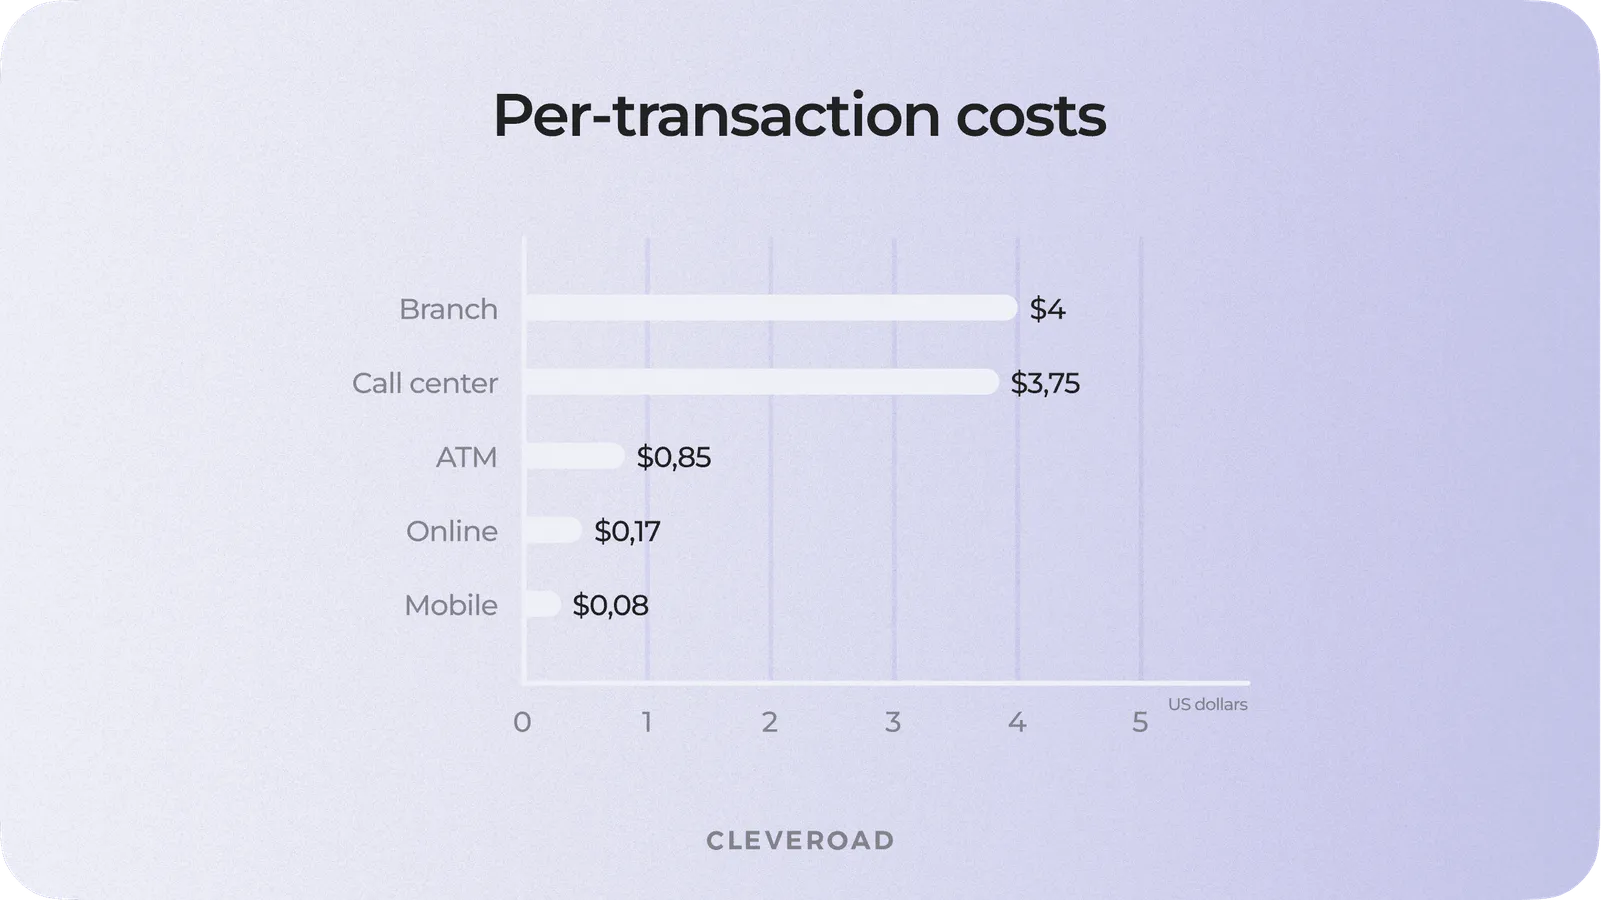 How much making a transaction costs, by channel